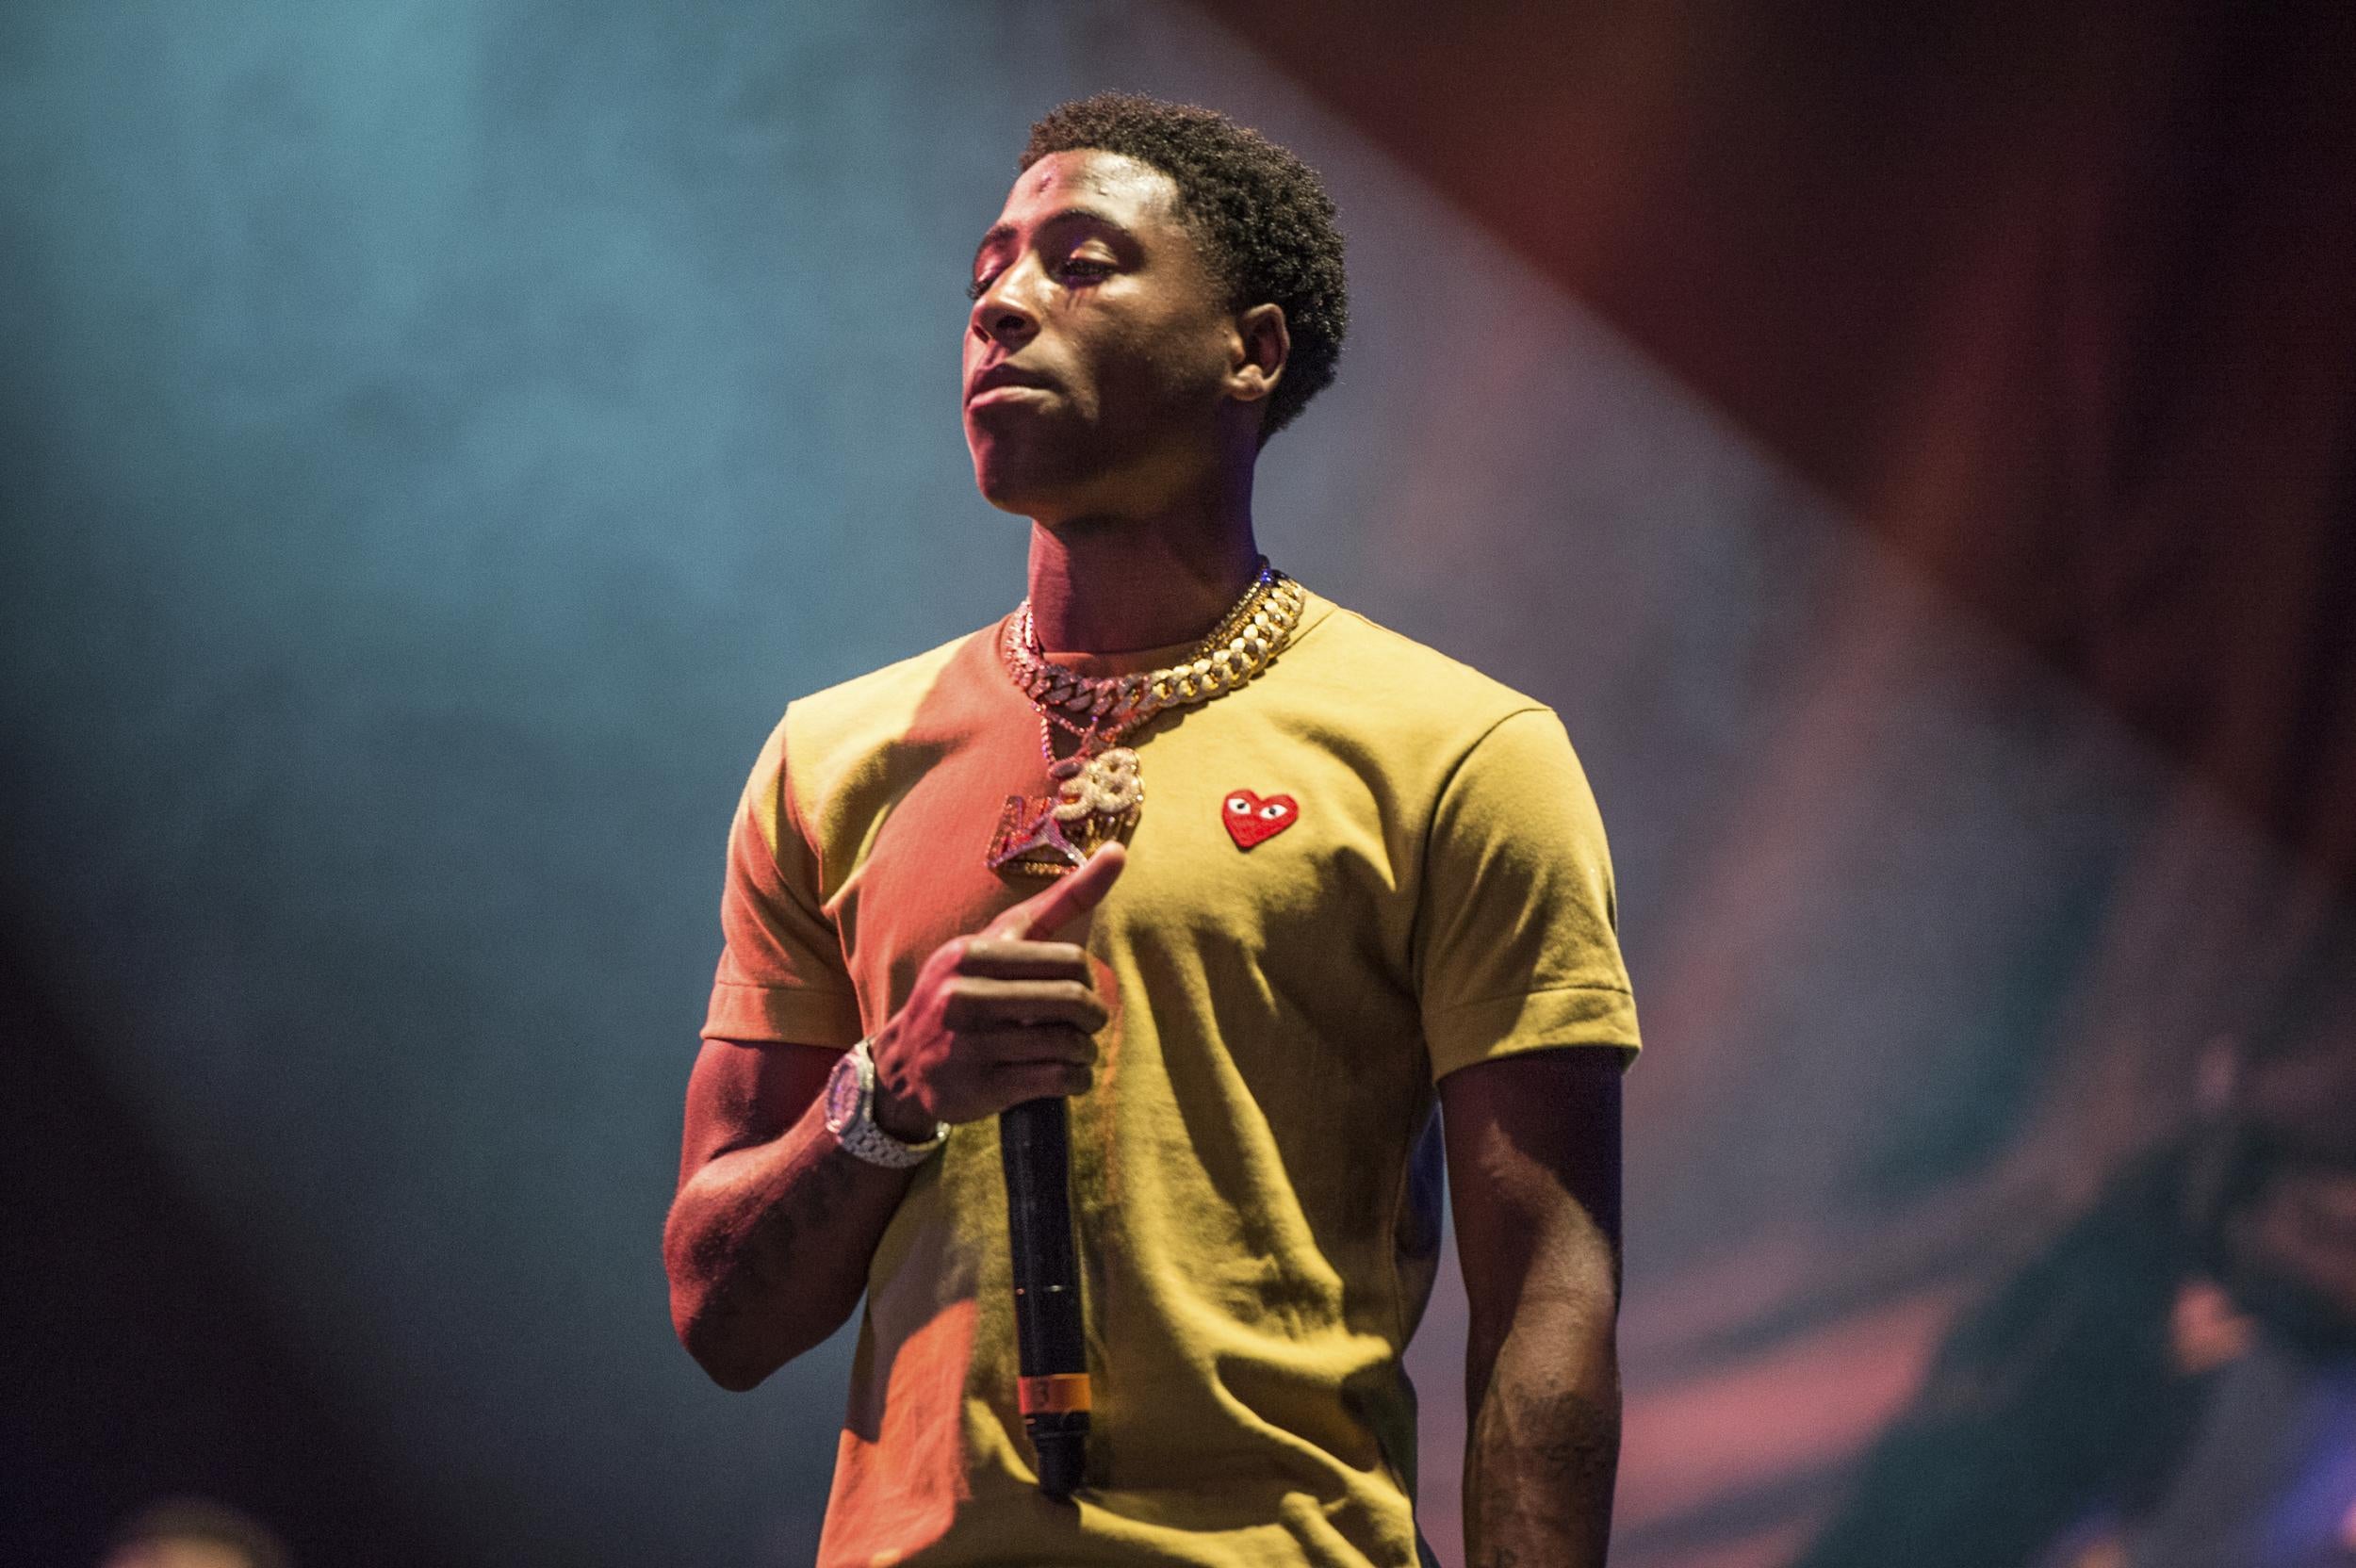 NBA YoungBoy performing in New Orleans in 2017 (file photo)